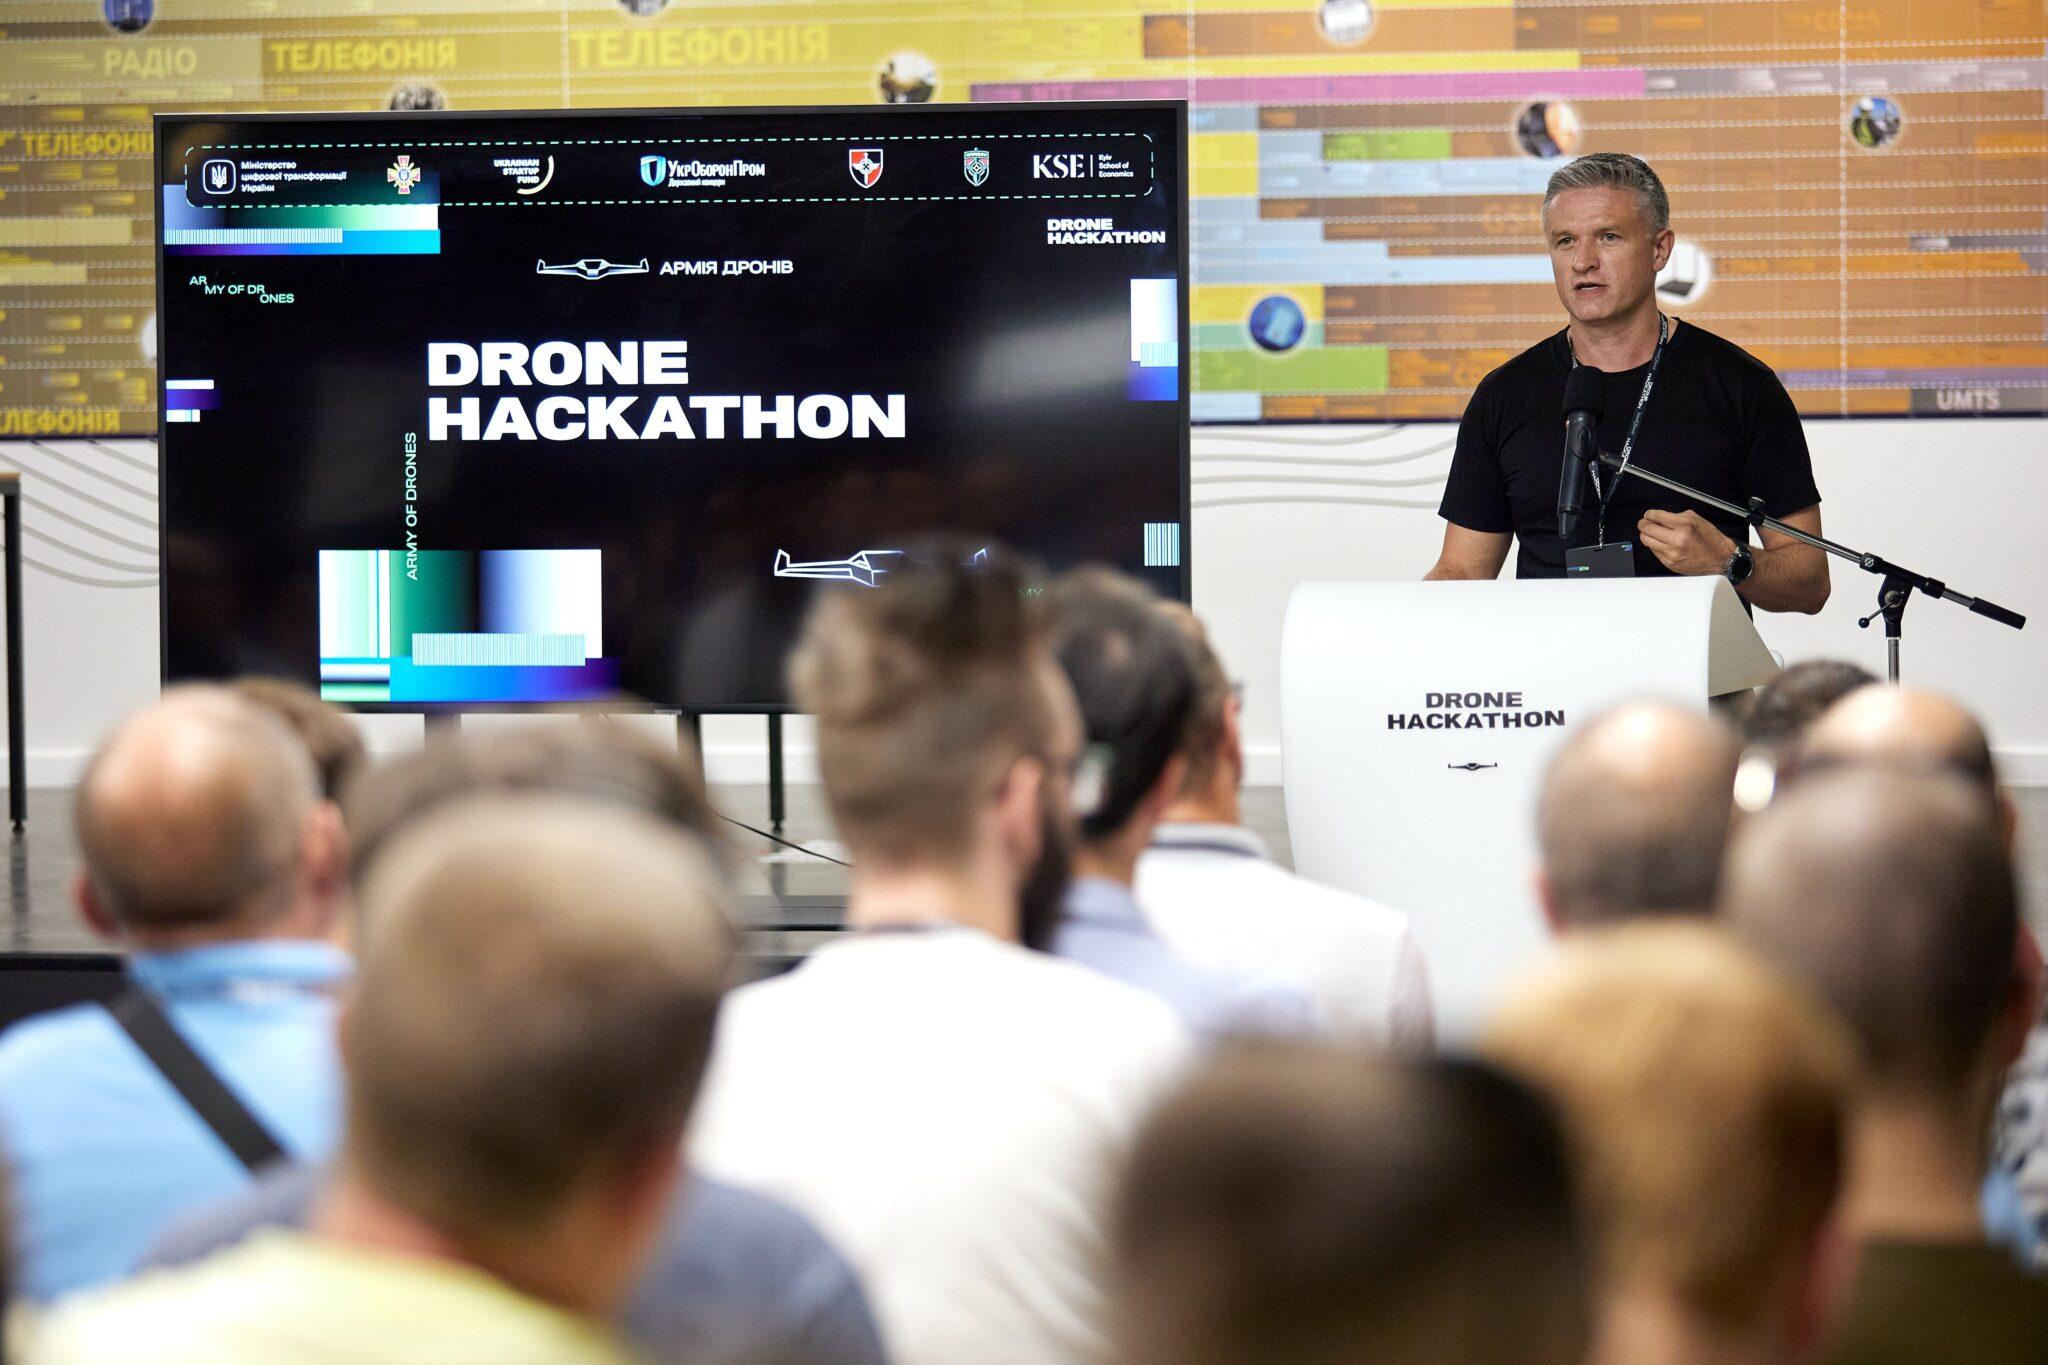 New technology solutions for the army: The first International Military Drone Hackathon has started